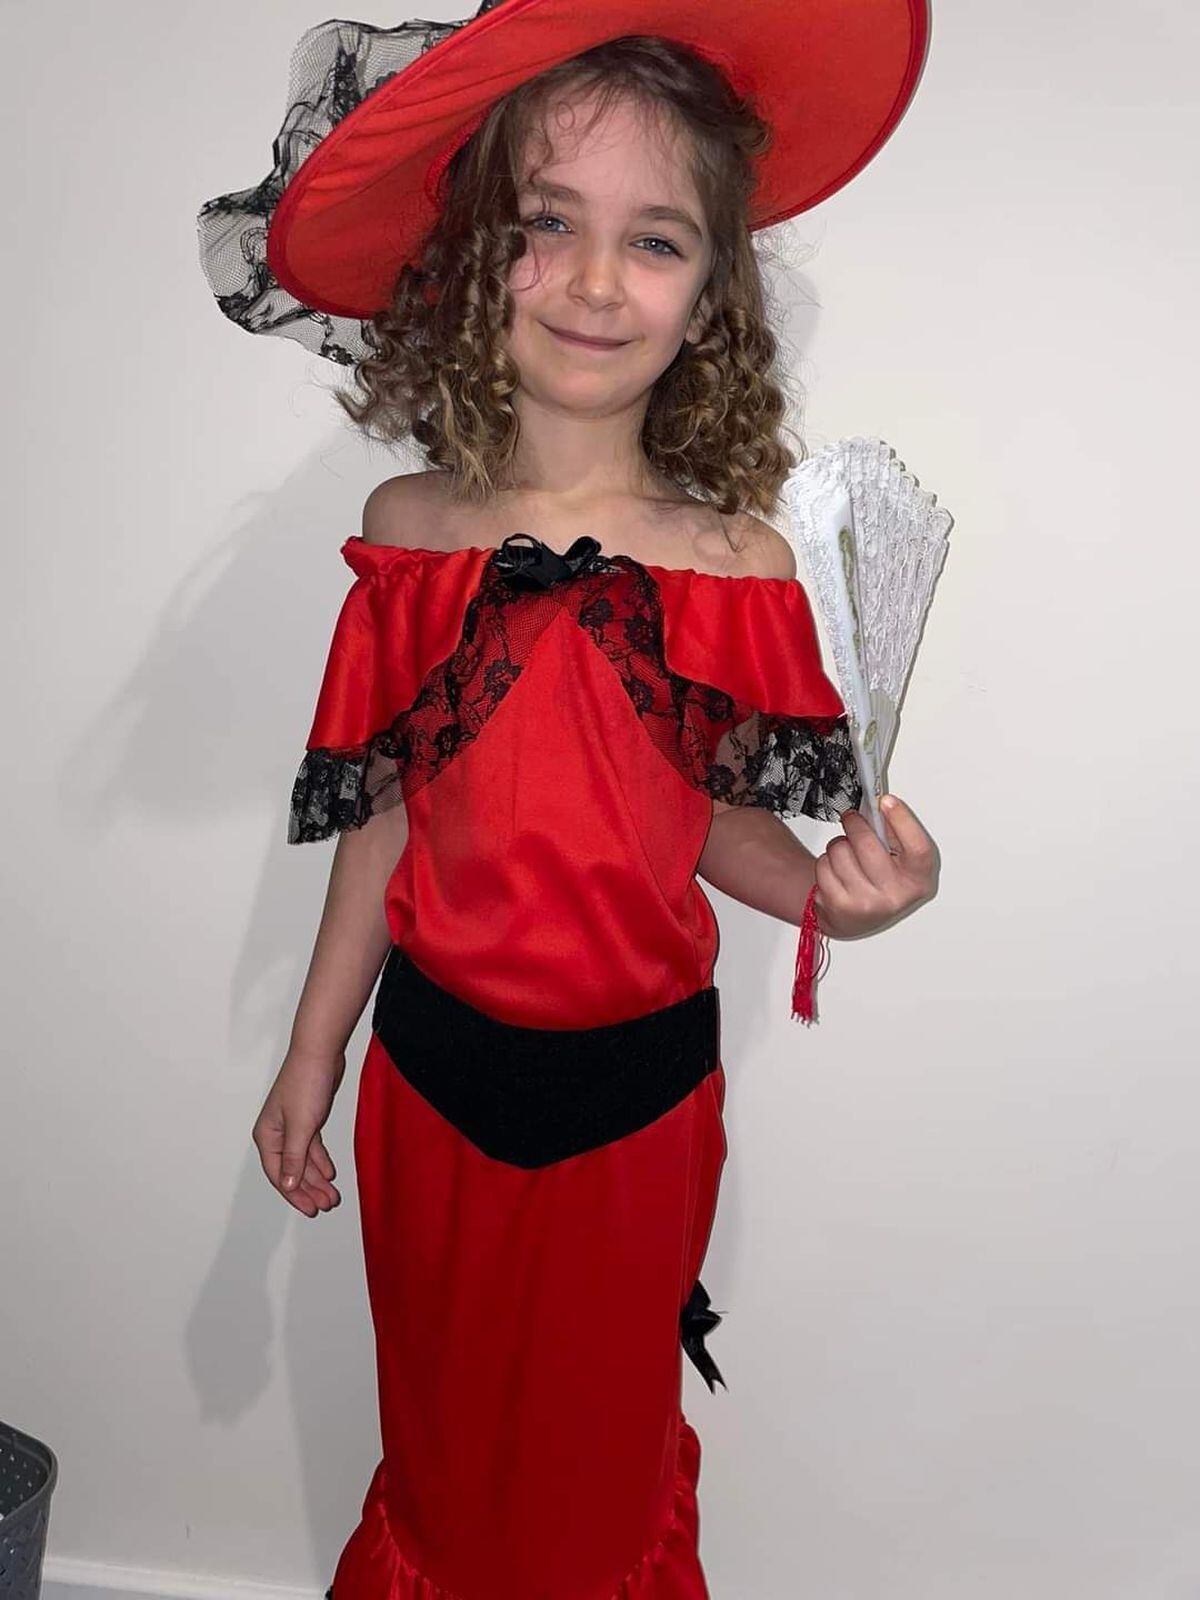 Jessica Lily dressed as Scarlett Ohara from Gone With The Wind